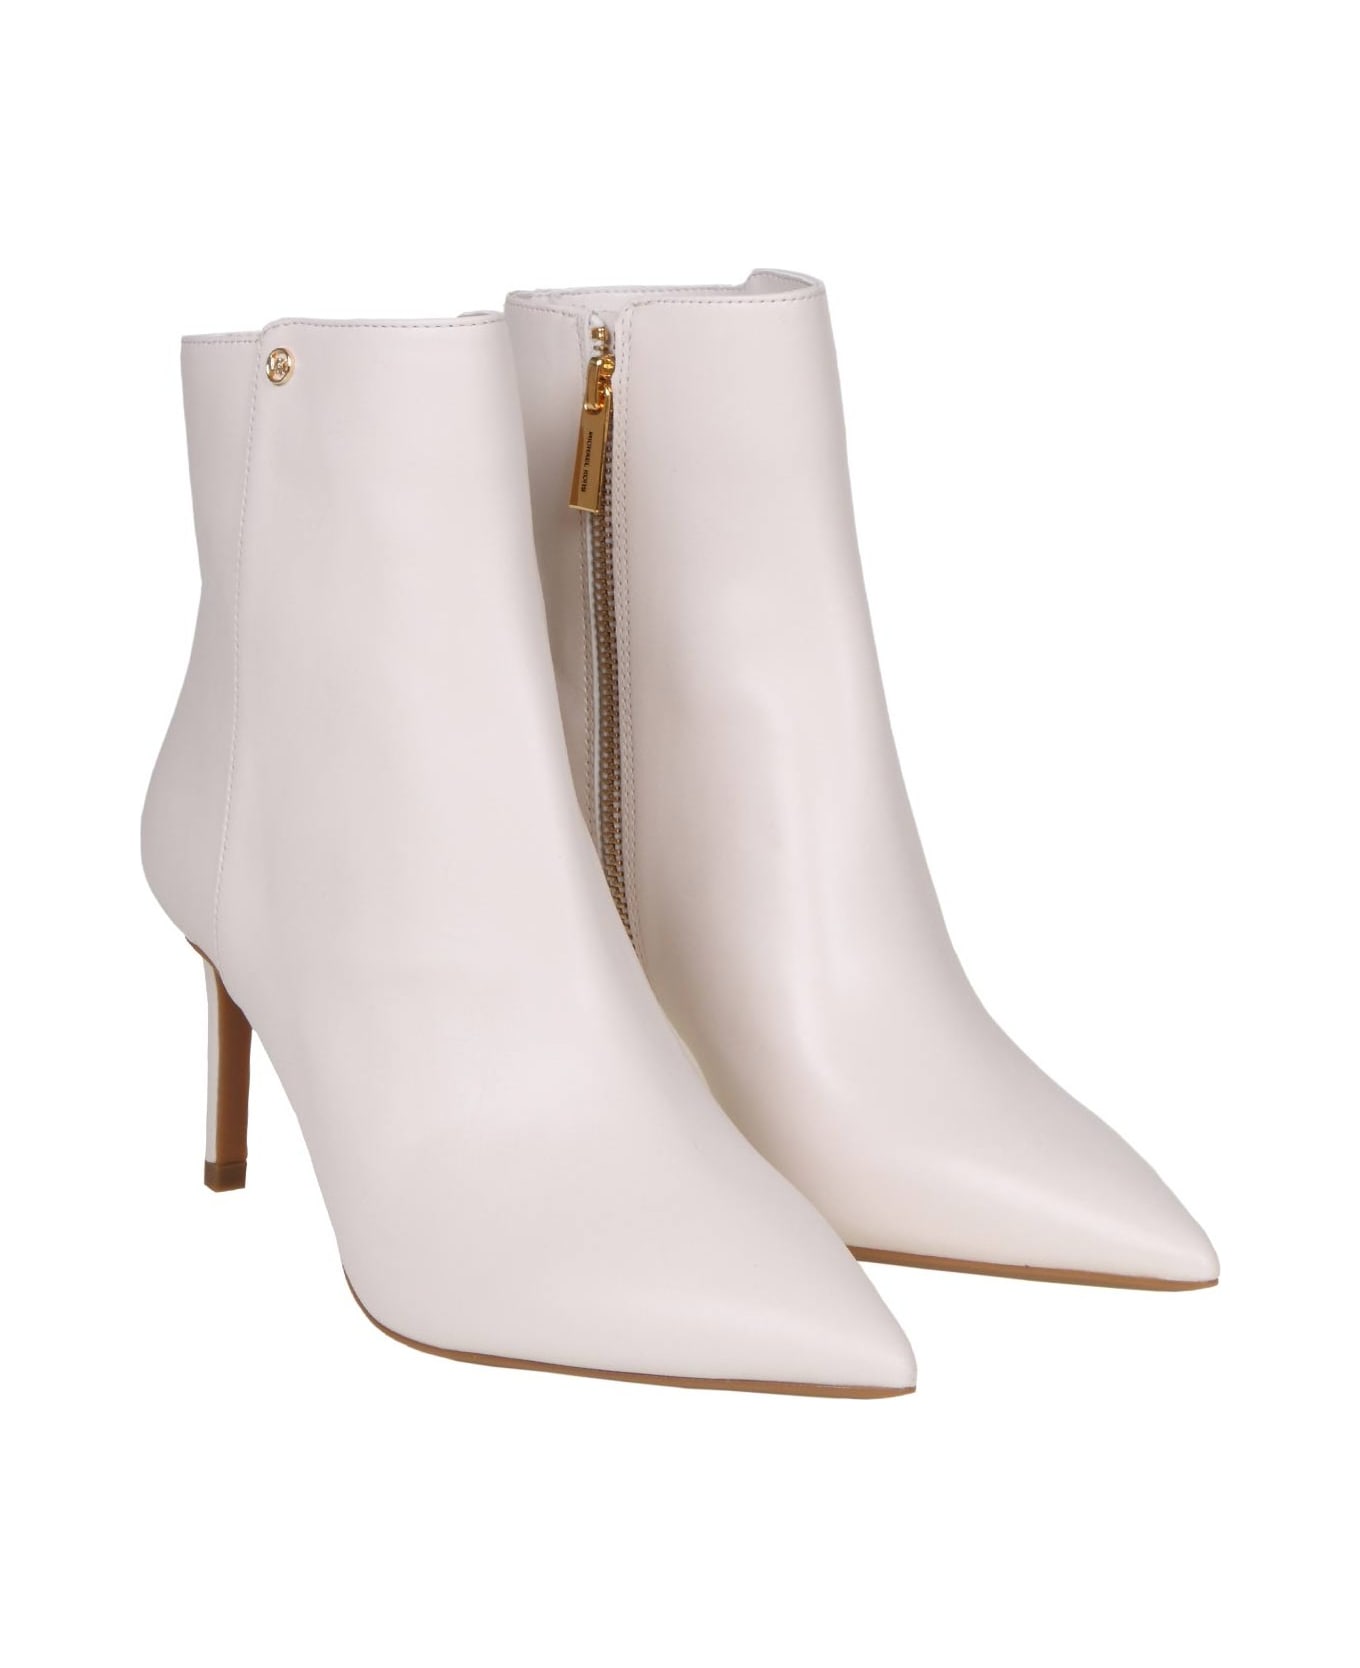 Michael Kors Boots In White Leather Michael Kors - WHITE